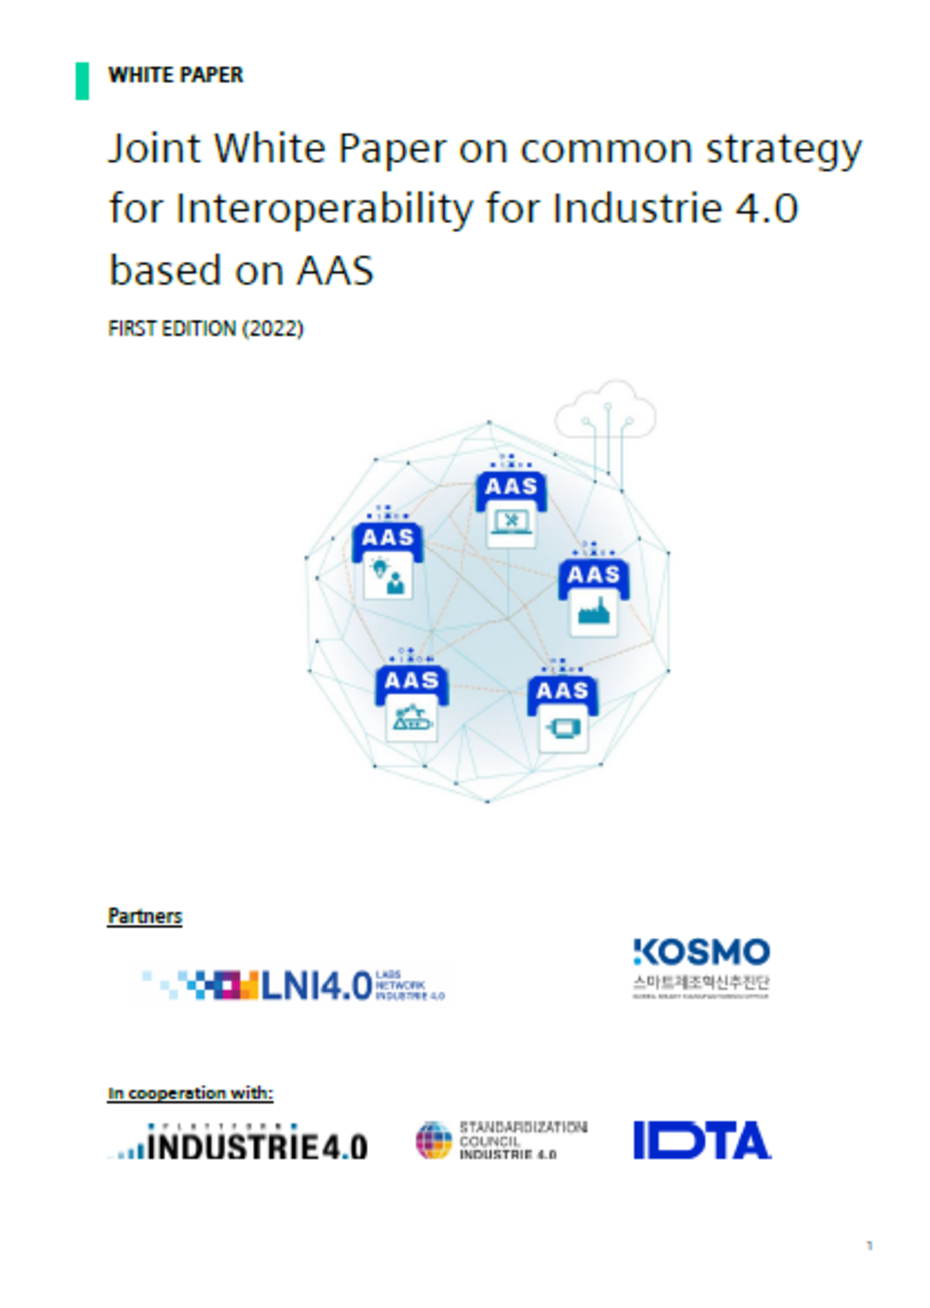 Joint White Paper on common strategy for Interoperability for Industrie 4.0 based on AAS